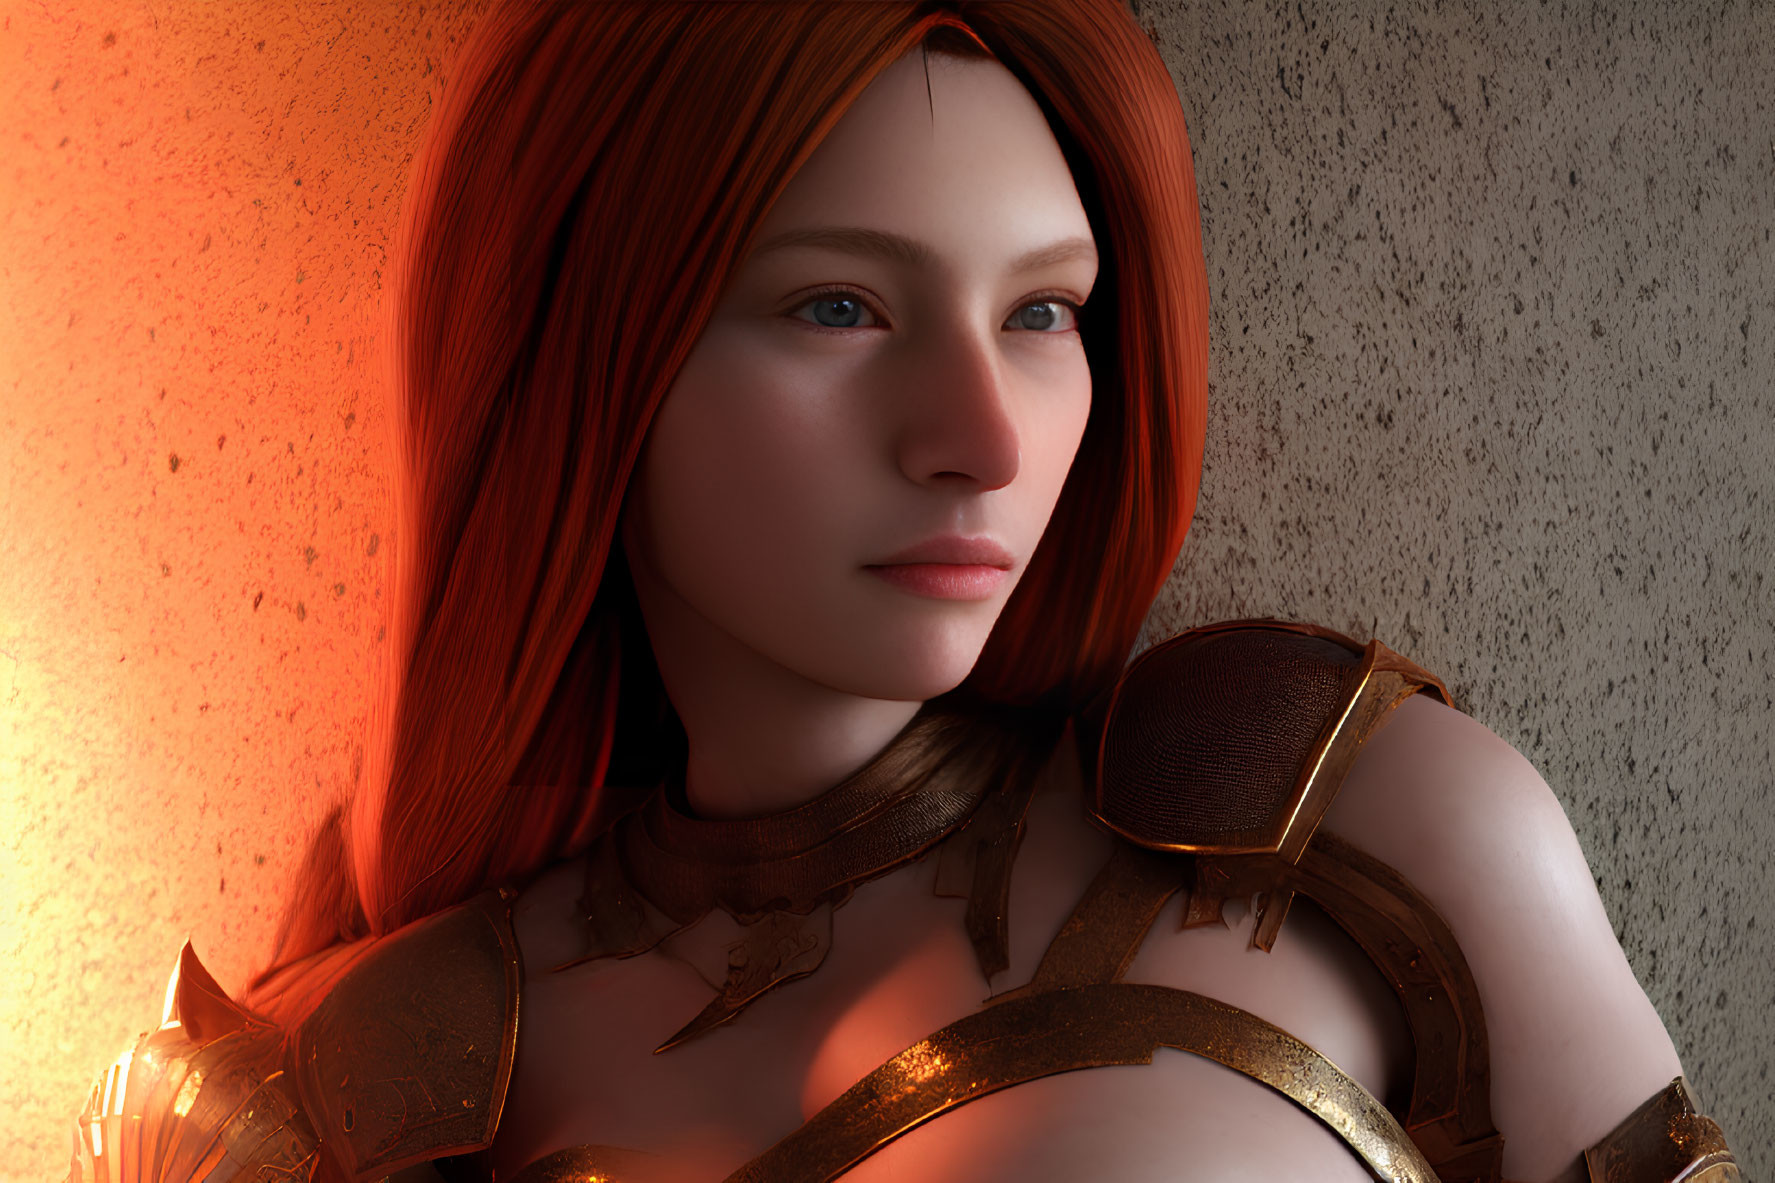 Detailed digital illustration of woman in red hair and medieval armor with warm lighting.